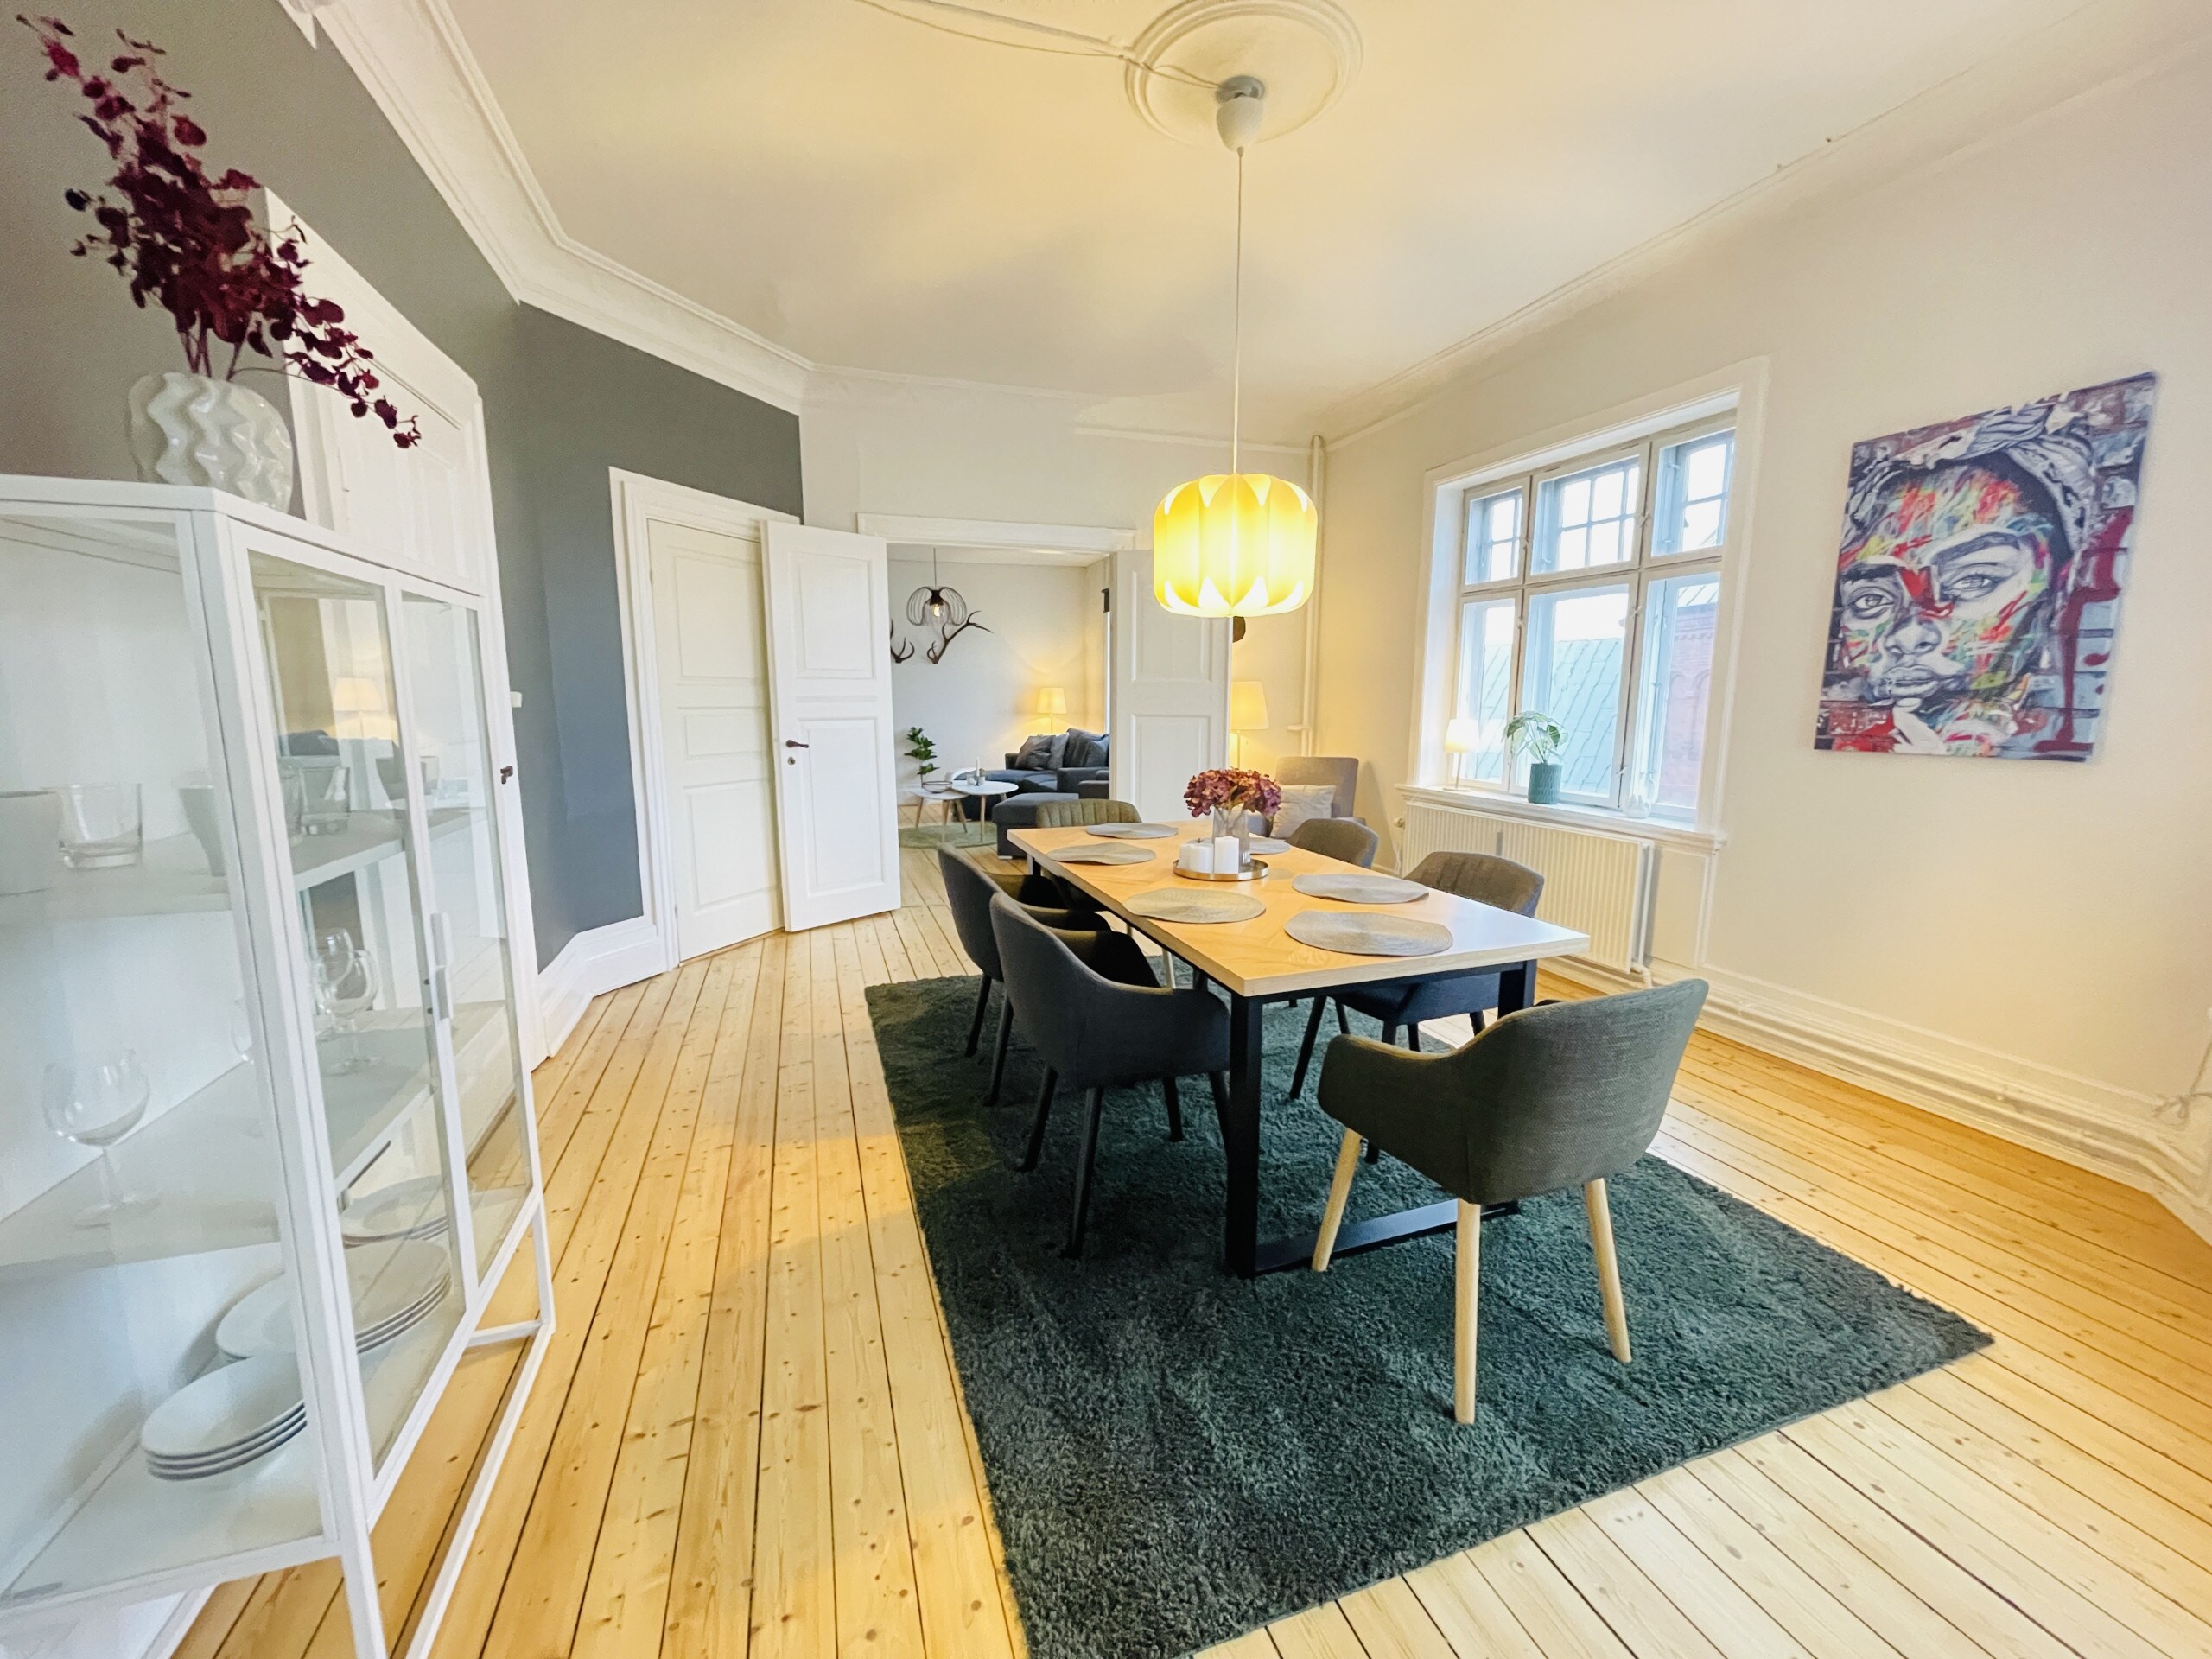 aday - Enchanting 2 bedroom apartment in the heart of Aalborg